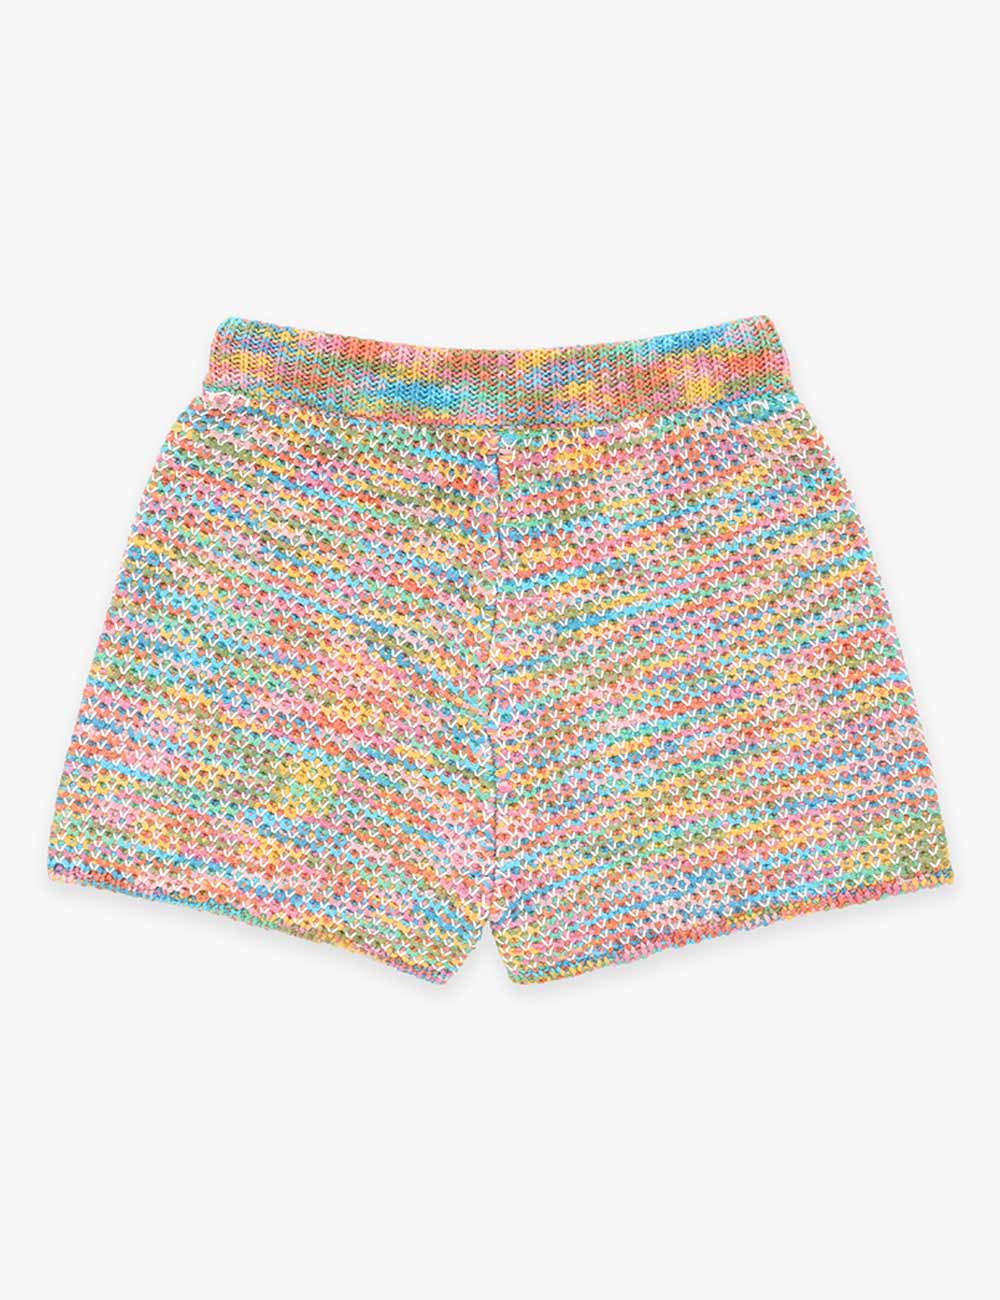 August Textured Knit Shorts